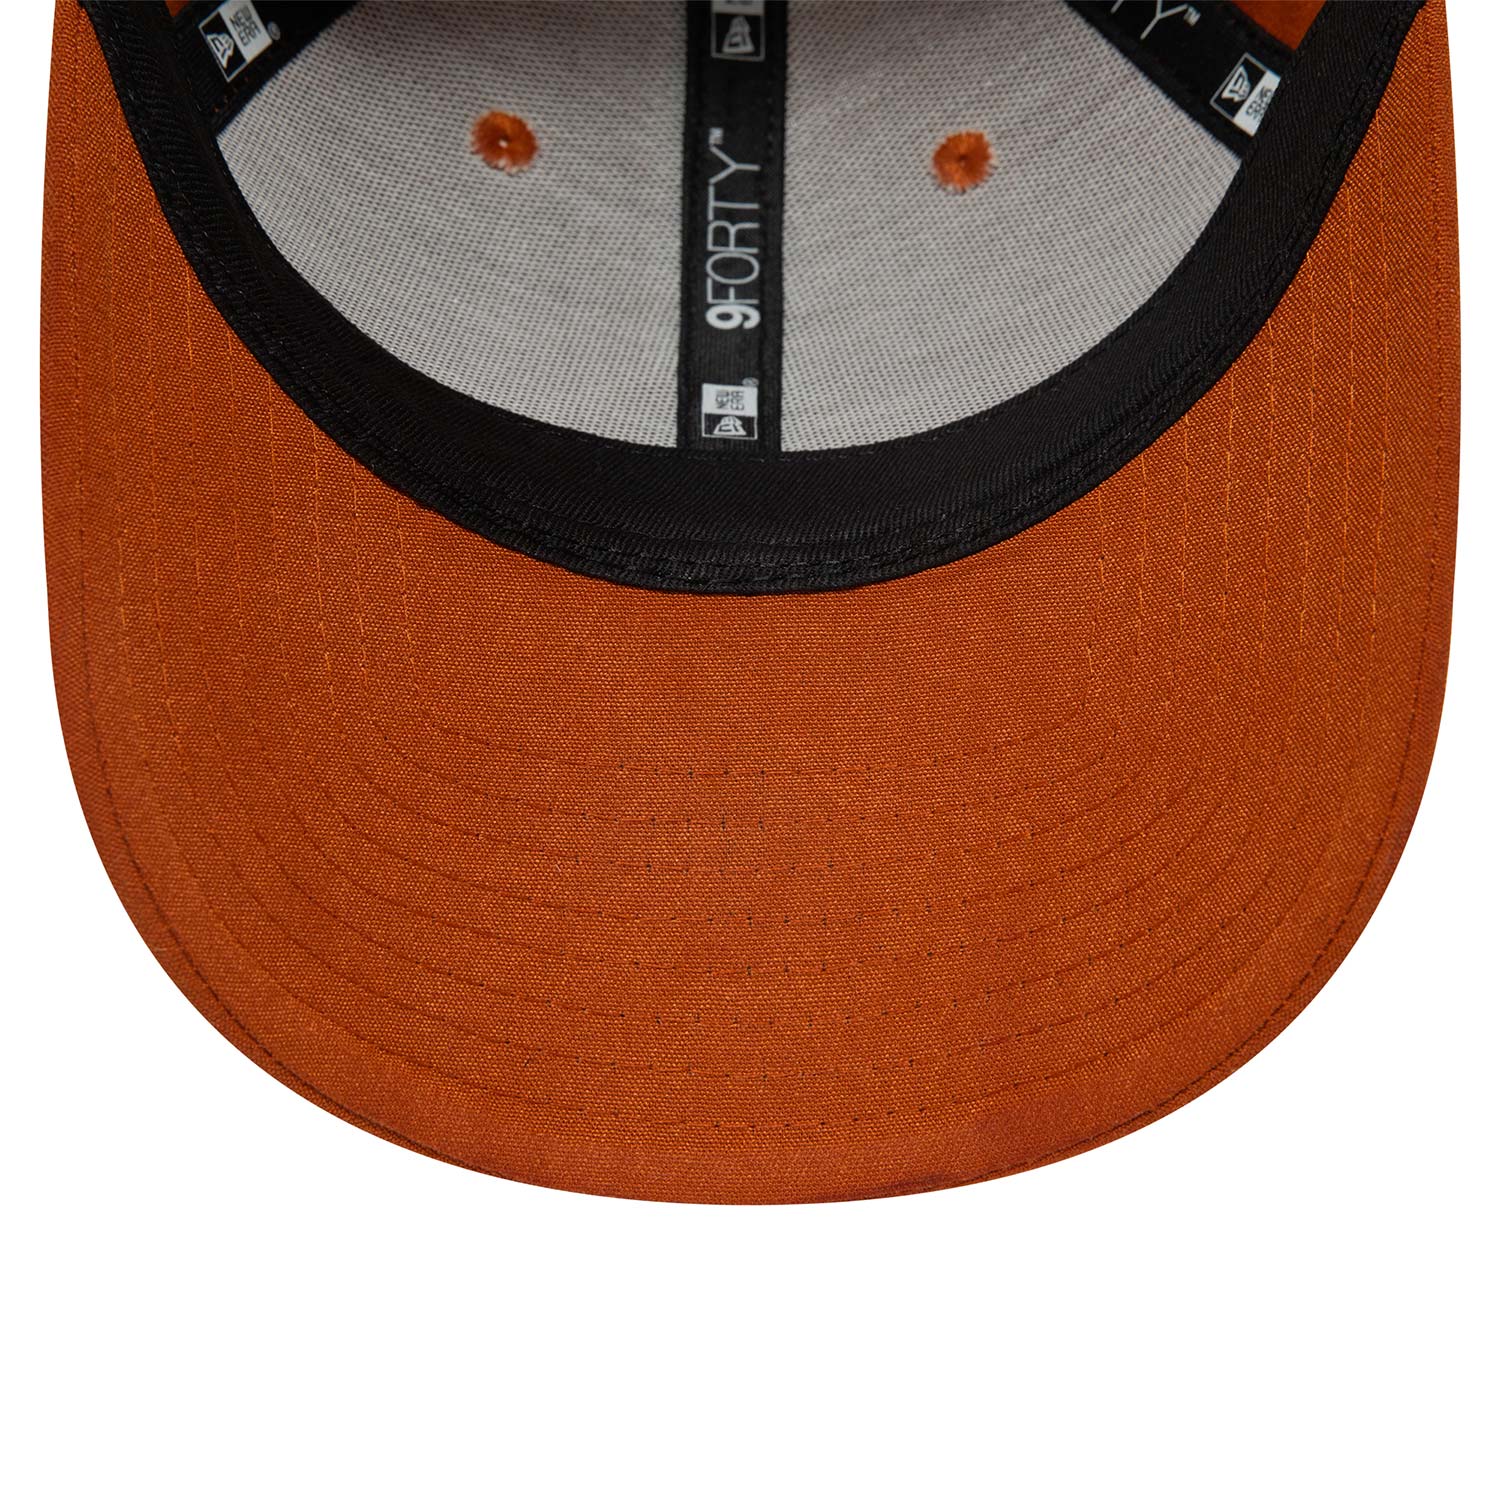 Tottenham Hotspur FC Repreve And Flag 2023 Brown 9FORTY Adjustable Cap